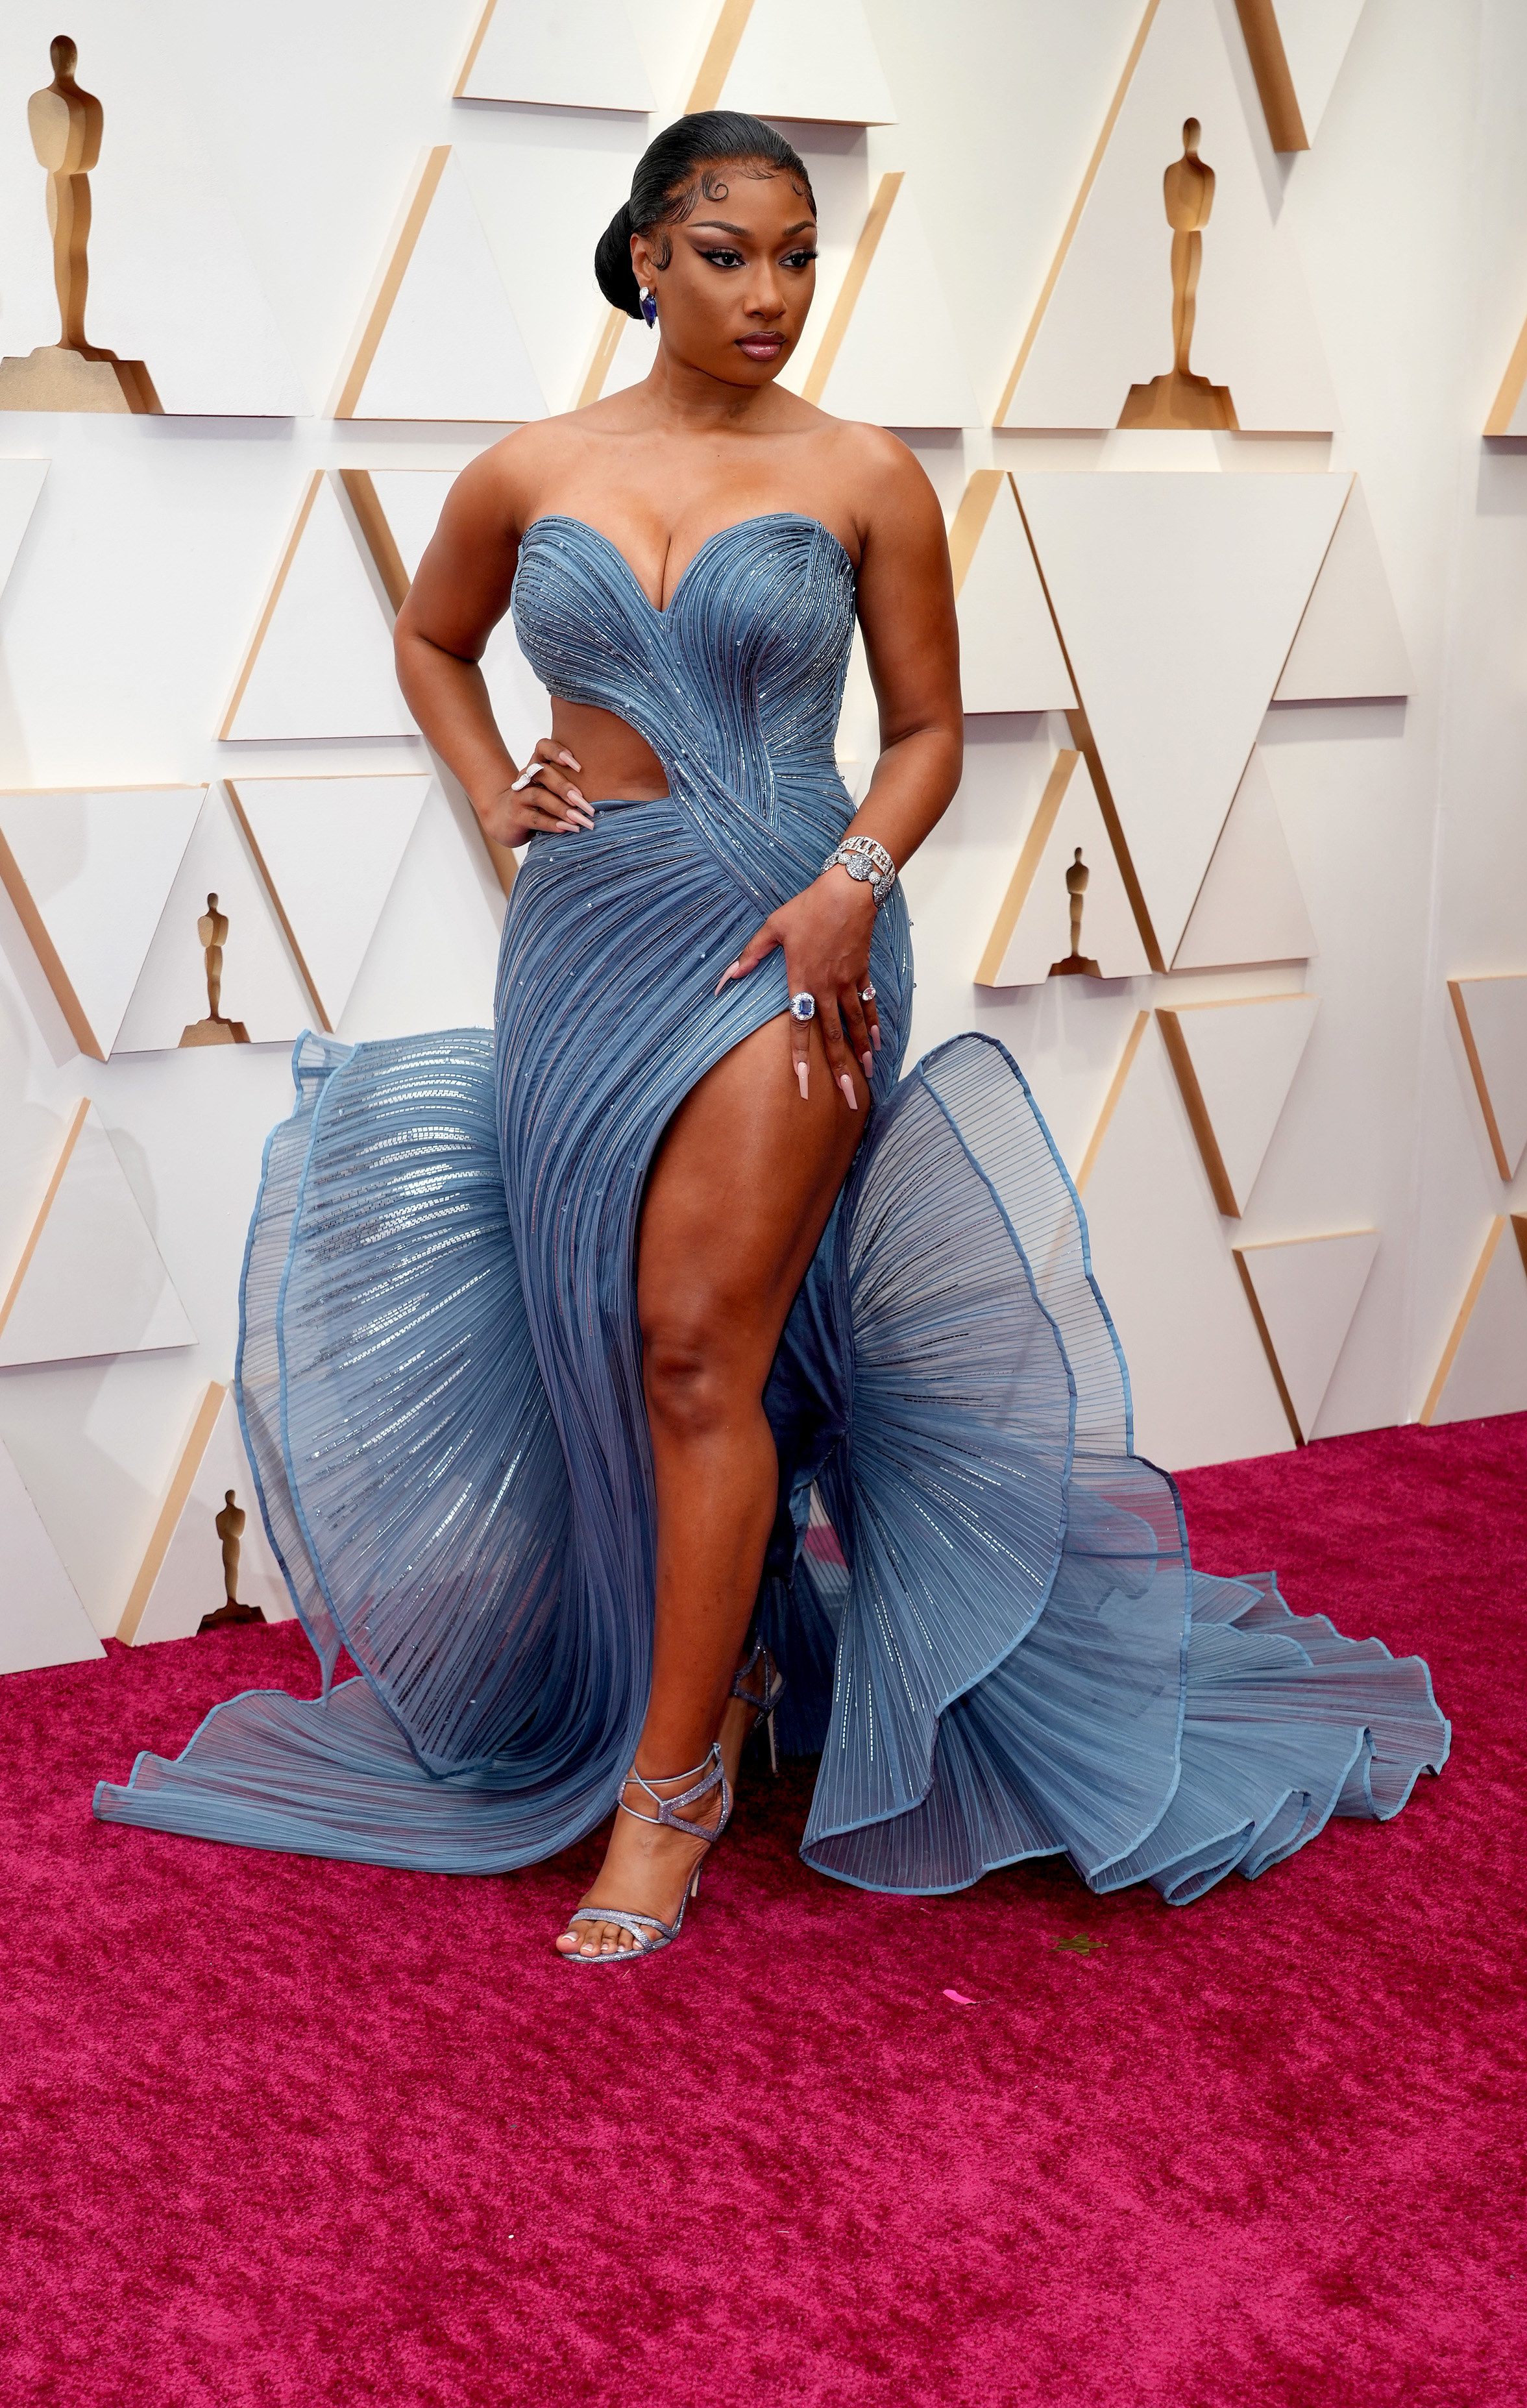 A side-view of Megan Thee Stallion in her gown